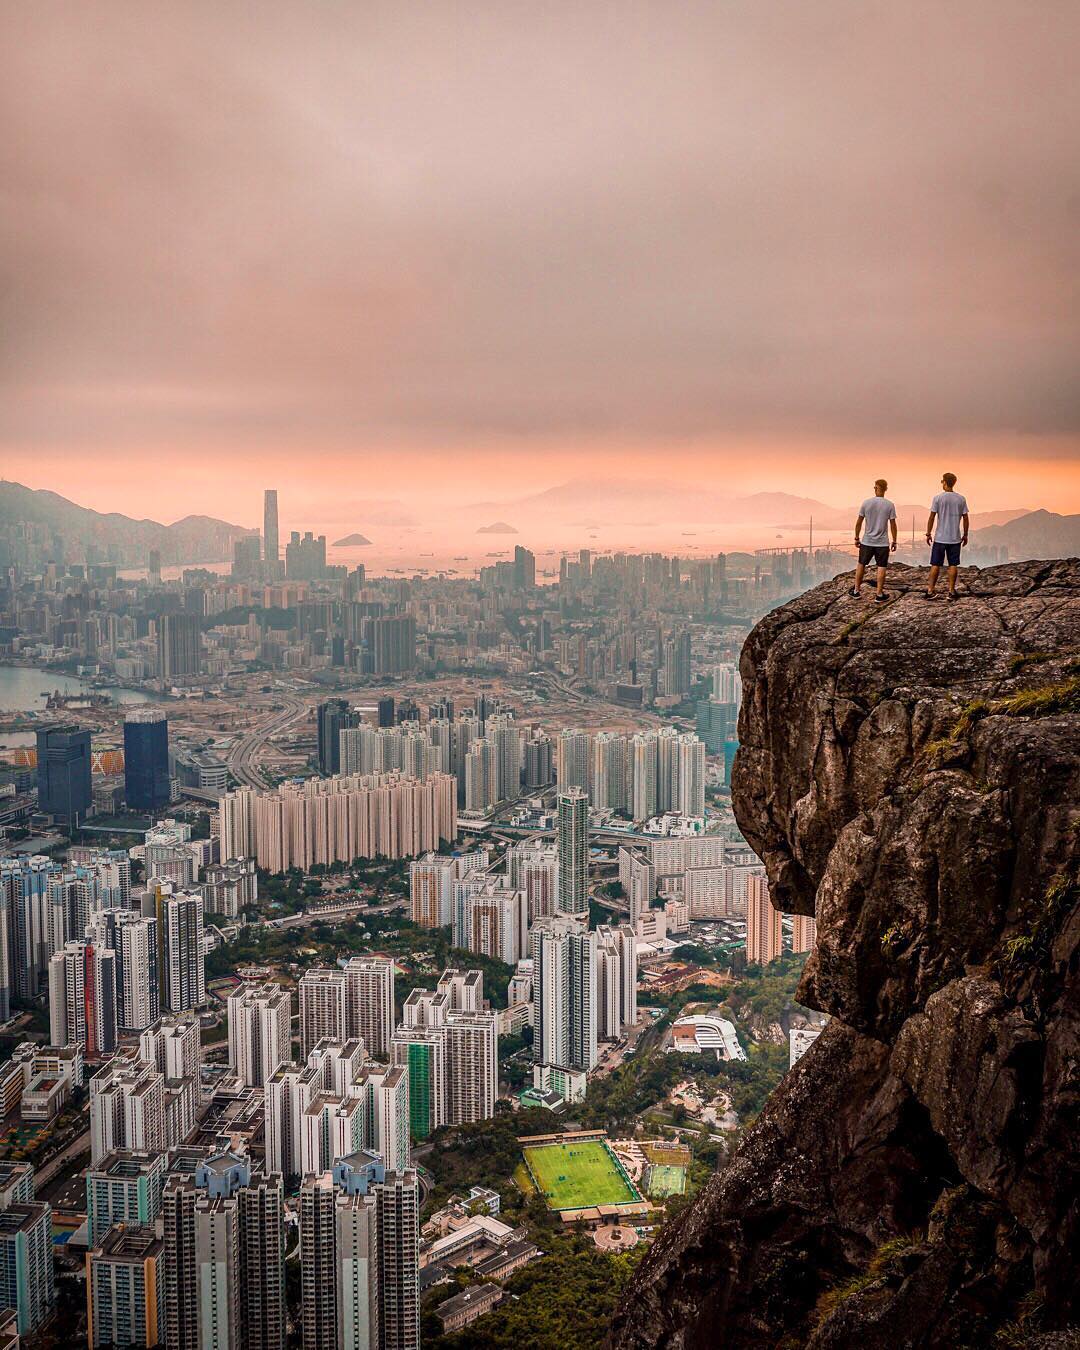 7 Secret Places To Visit In Hong Kong For The Best Instagram Photos